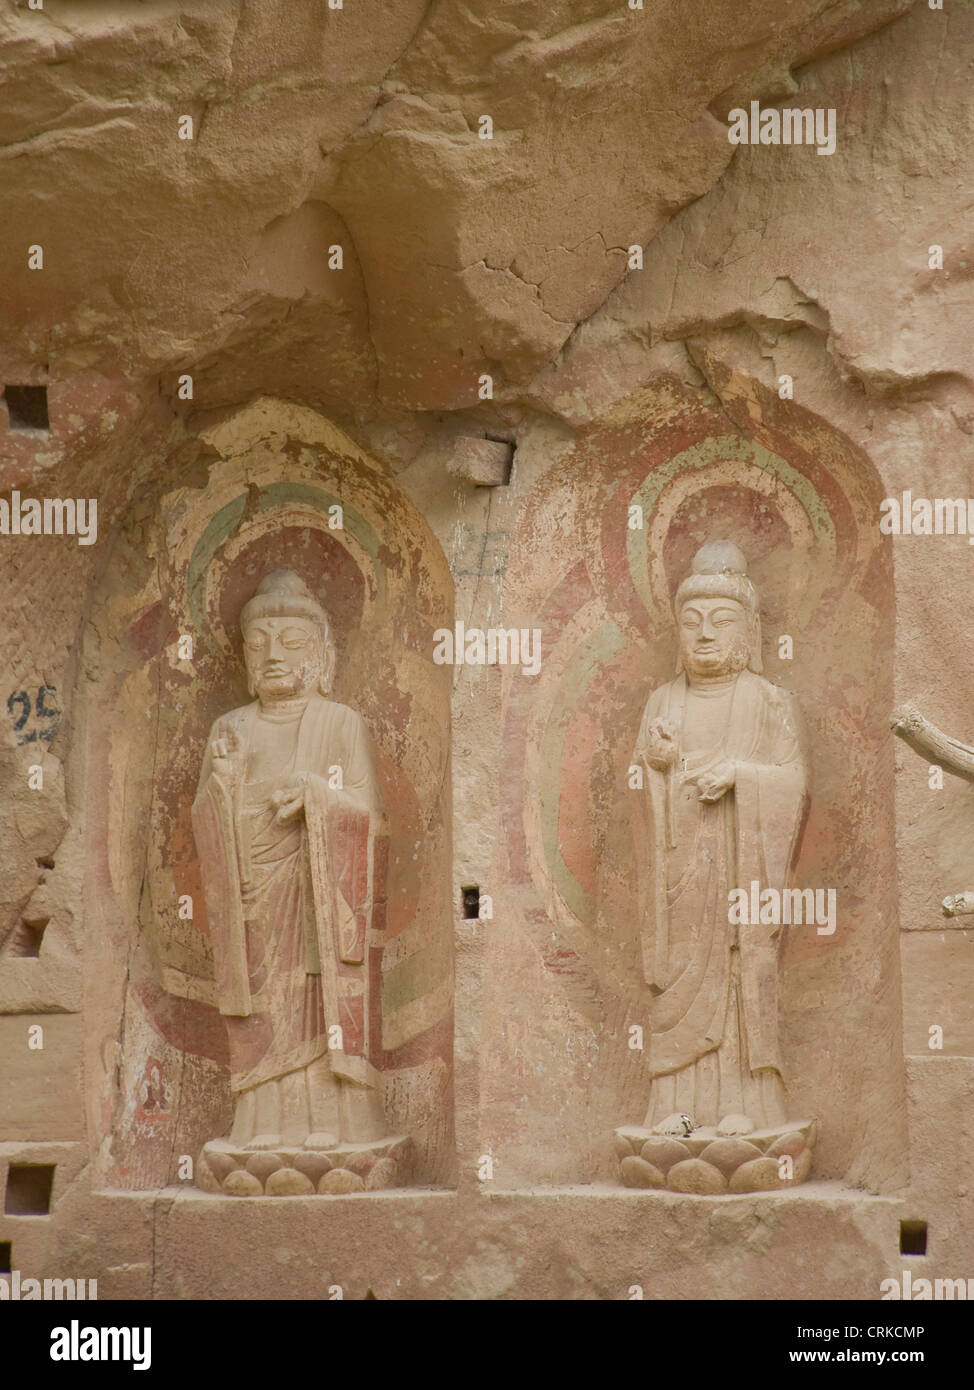 Smaller relief stone carvings at the Bingling grottoes. Stock Photo